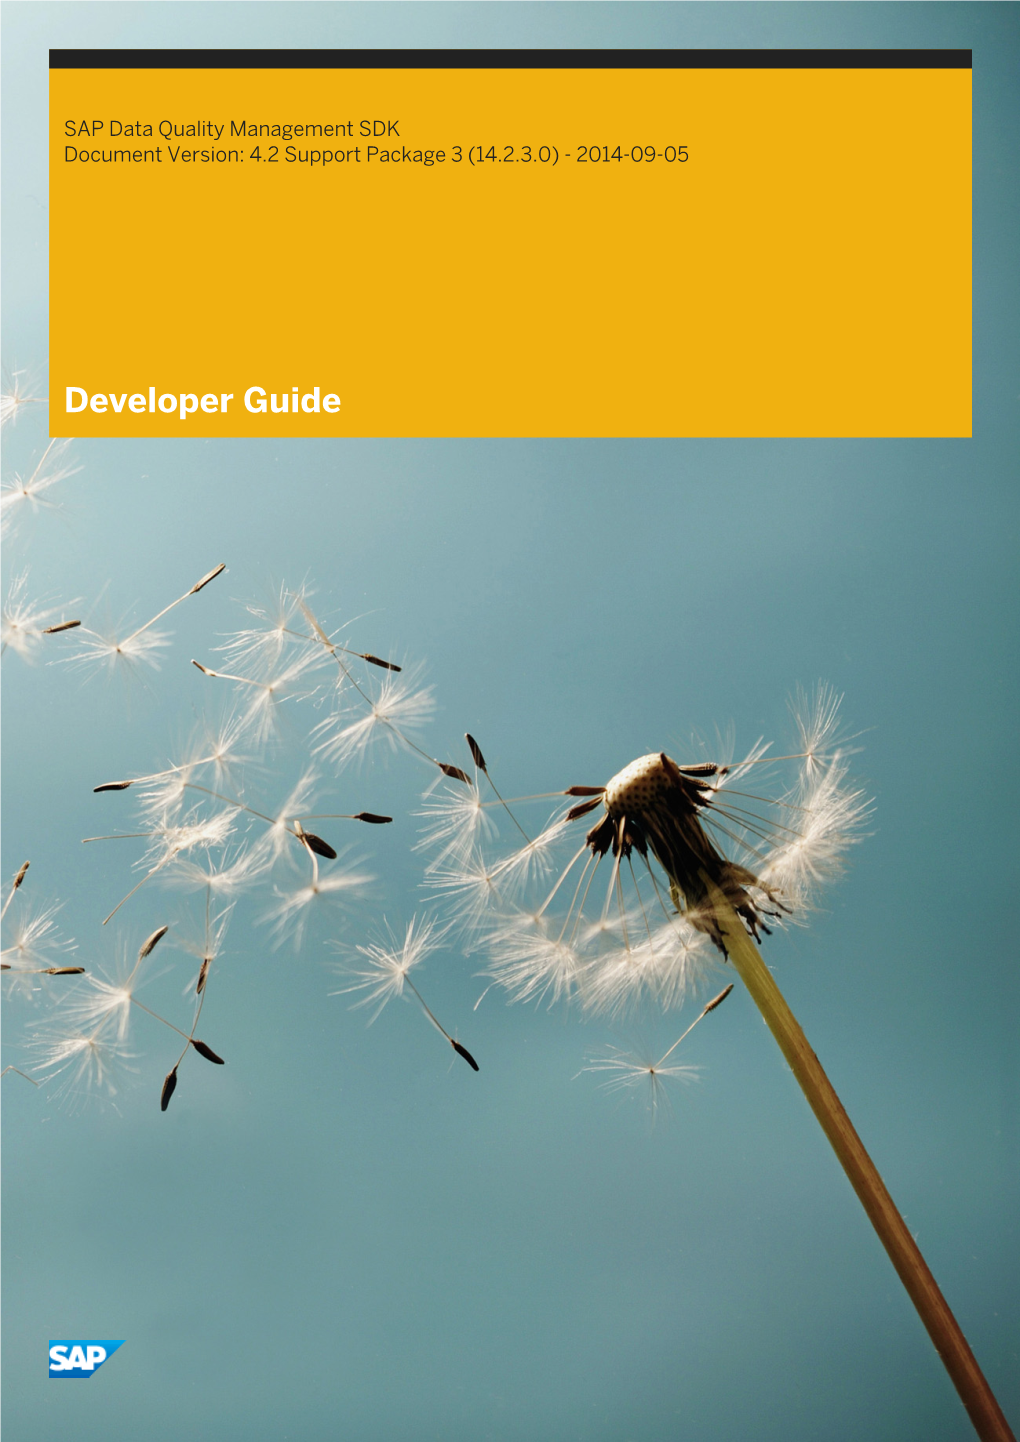 Developer Guide Table of Contents